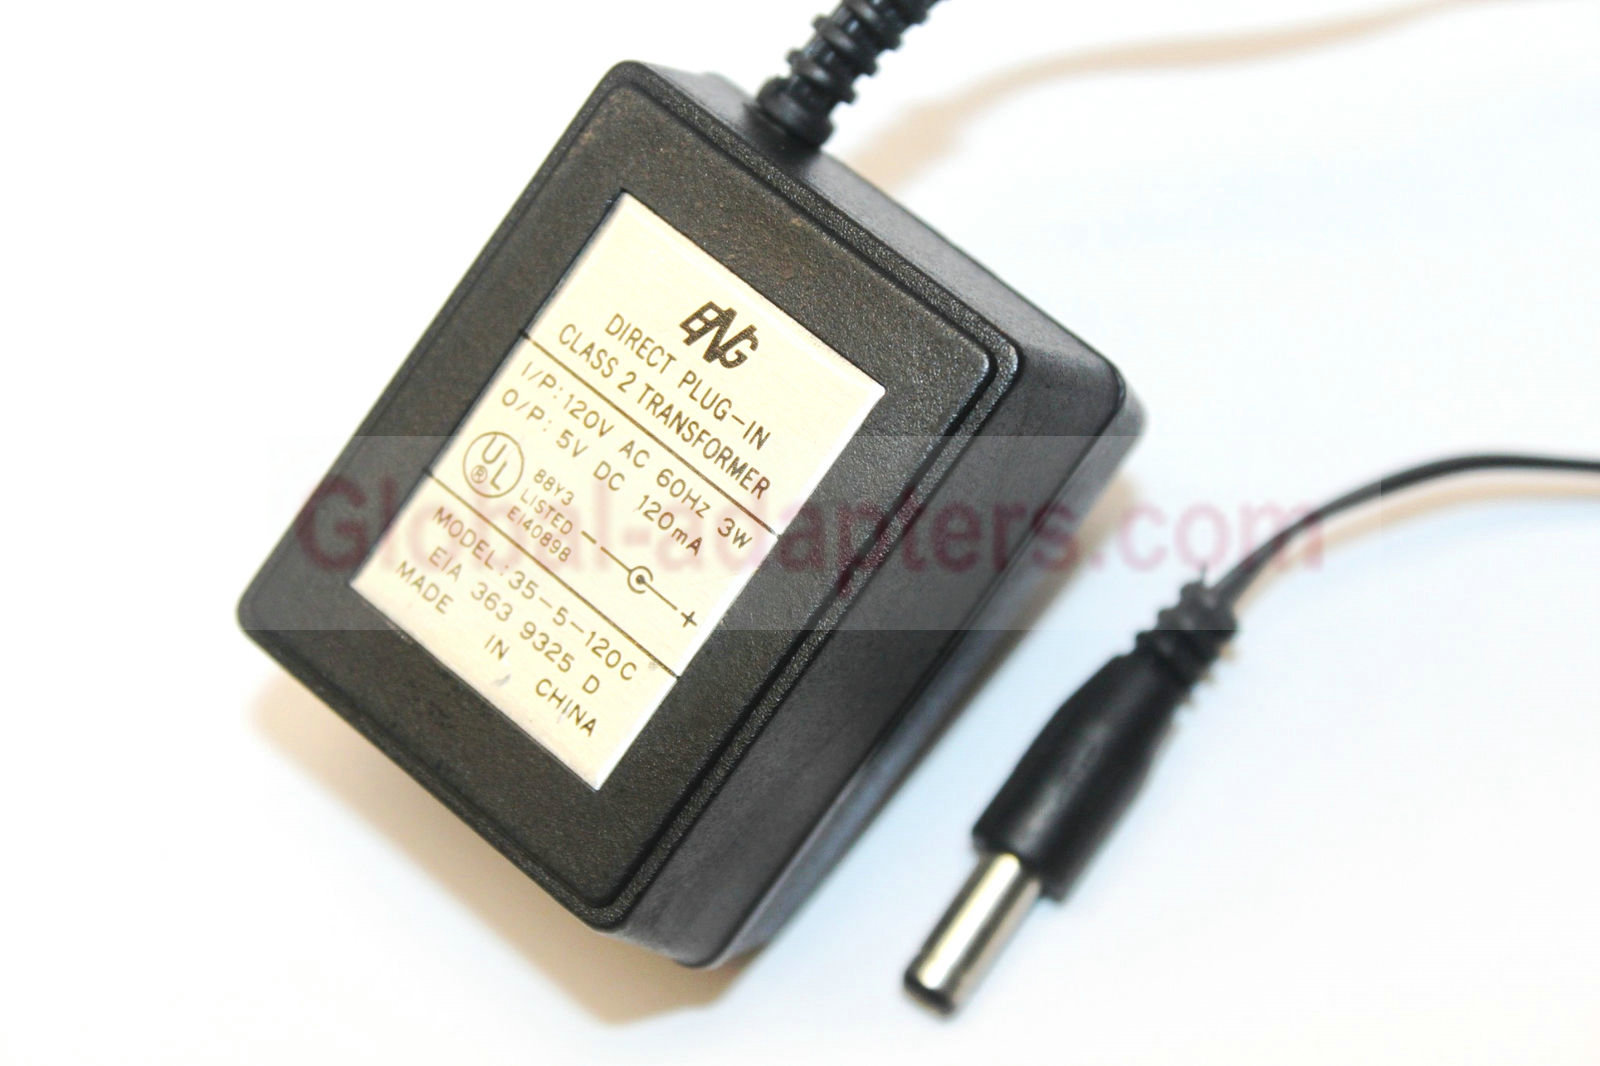 New 5V 120mA ENG 35-5-120C Direct Plug-In Class 2 Transformer Power Supply Ac Adapter